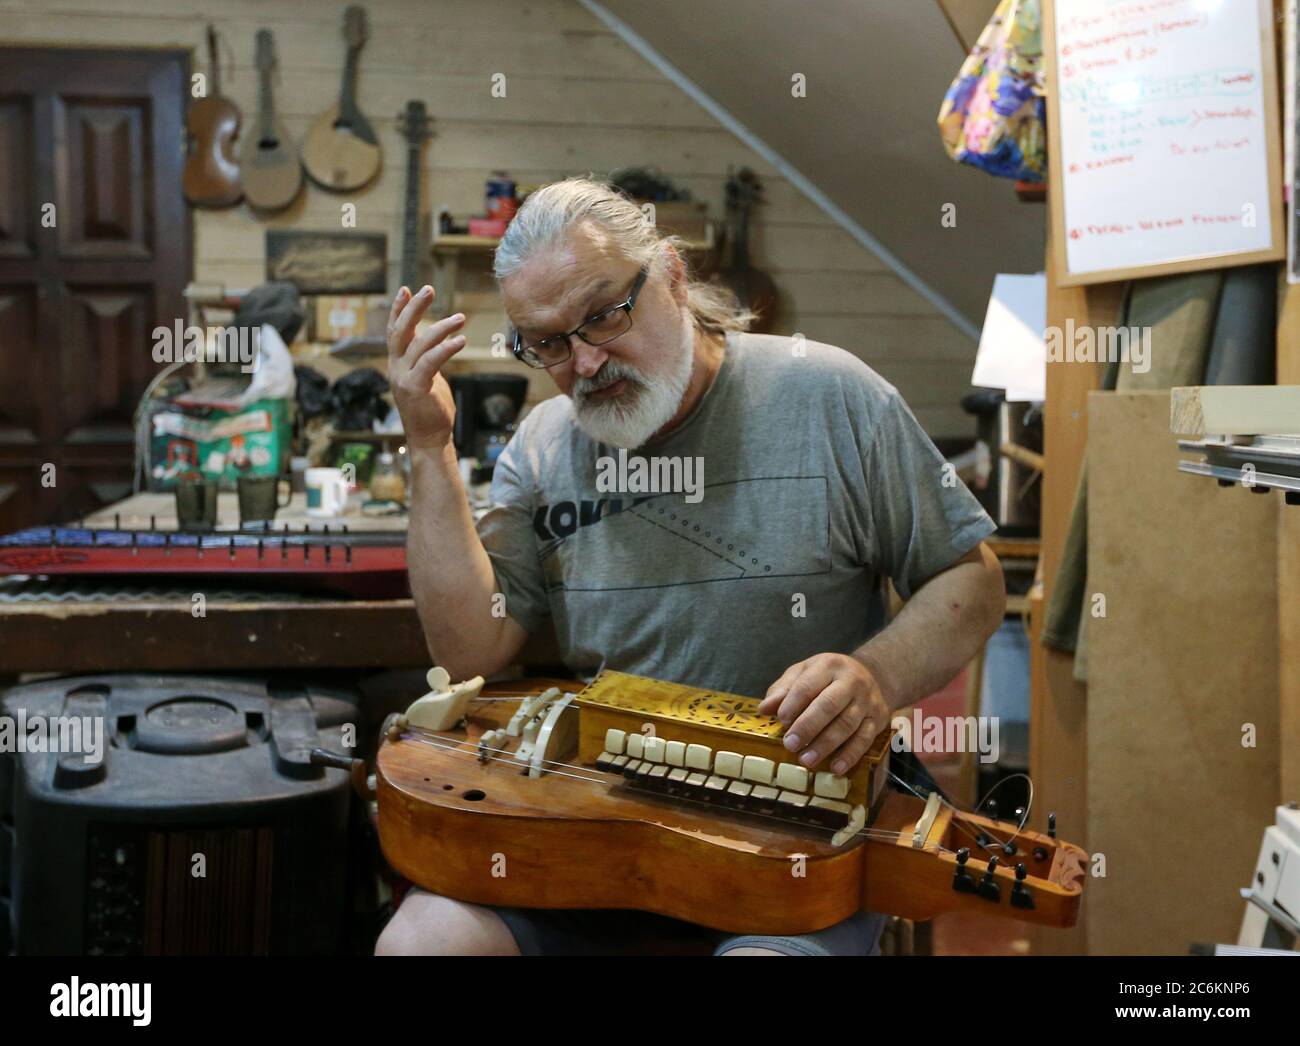 KRASNOYARSK TERRITORY, RUSSIA - JULY 4, 2020: Musical instrument maker  Mariss Jansons, 57, a follower of the Church of the Last Testament  religious movement, in his workshop in the Siberian village of